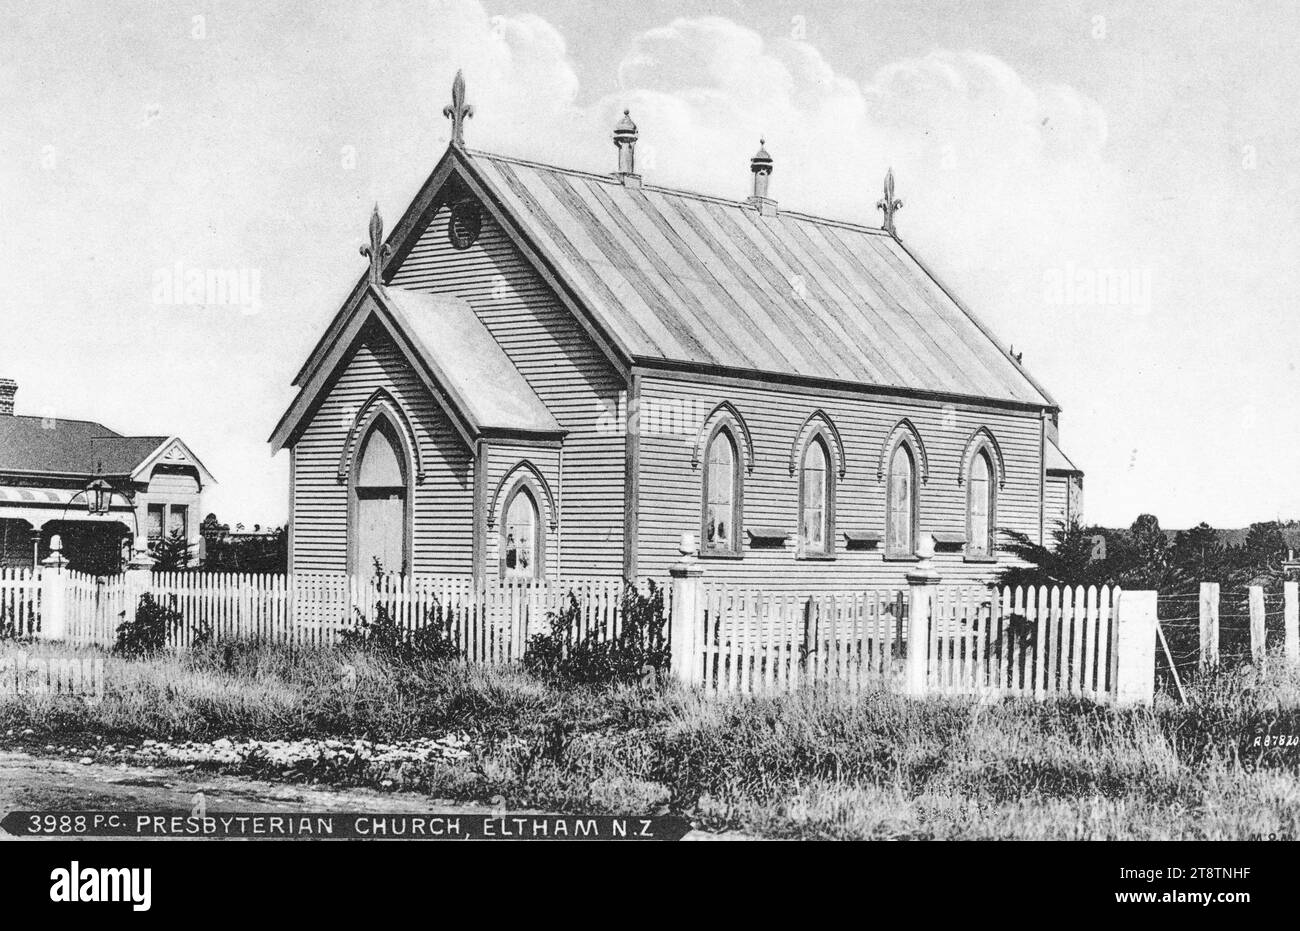 Postcard. Presbyterian Church, Eltham, N.Z. 3988 P.C. M.A.W. series, printed in Saxony ca 1904-1914, Shows a wooden church building with porch and four Gothic wondows along the side Stock Photo